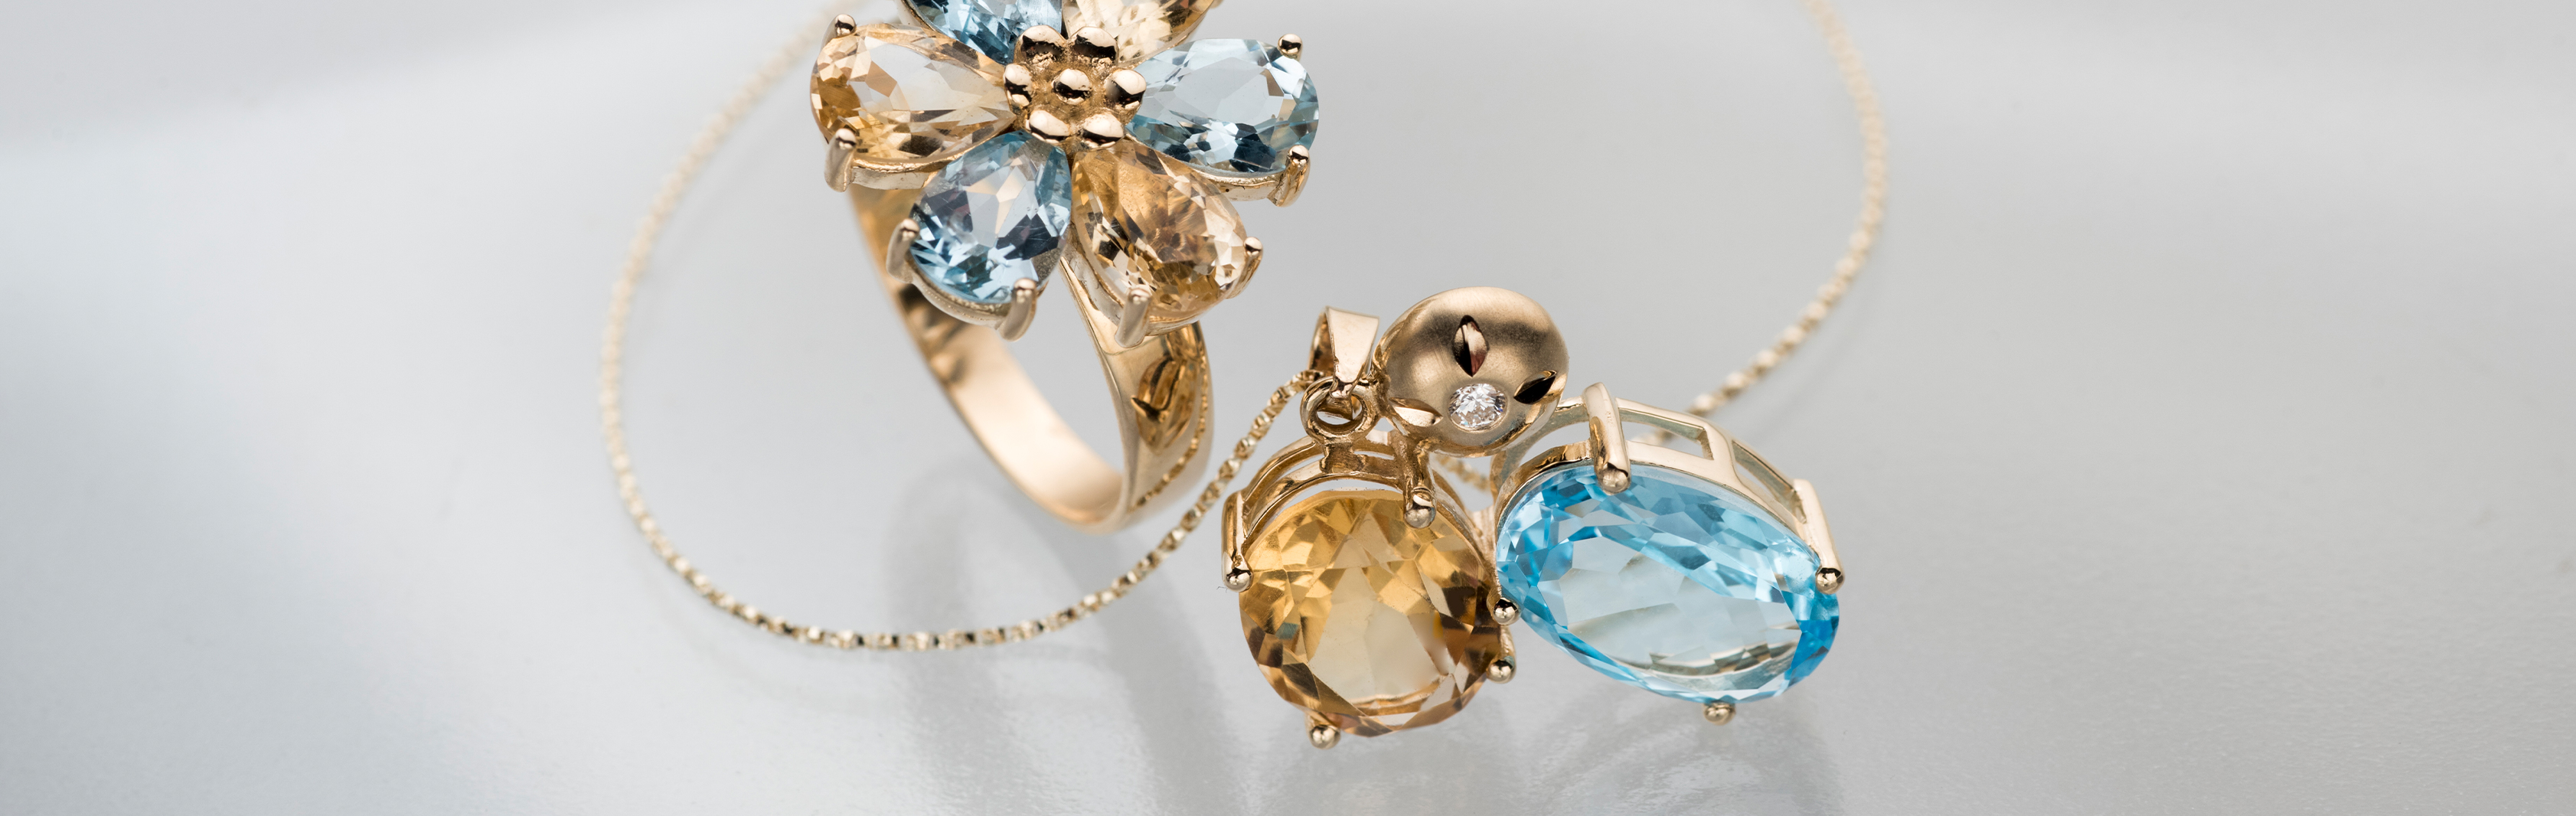 Earthly Balance Collection | 14K Gold Blue Topaz, Citrine and Diamond Jewelry